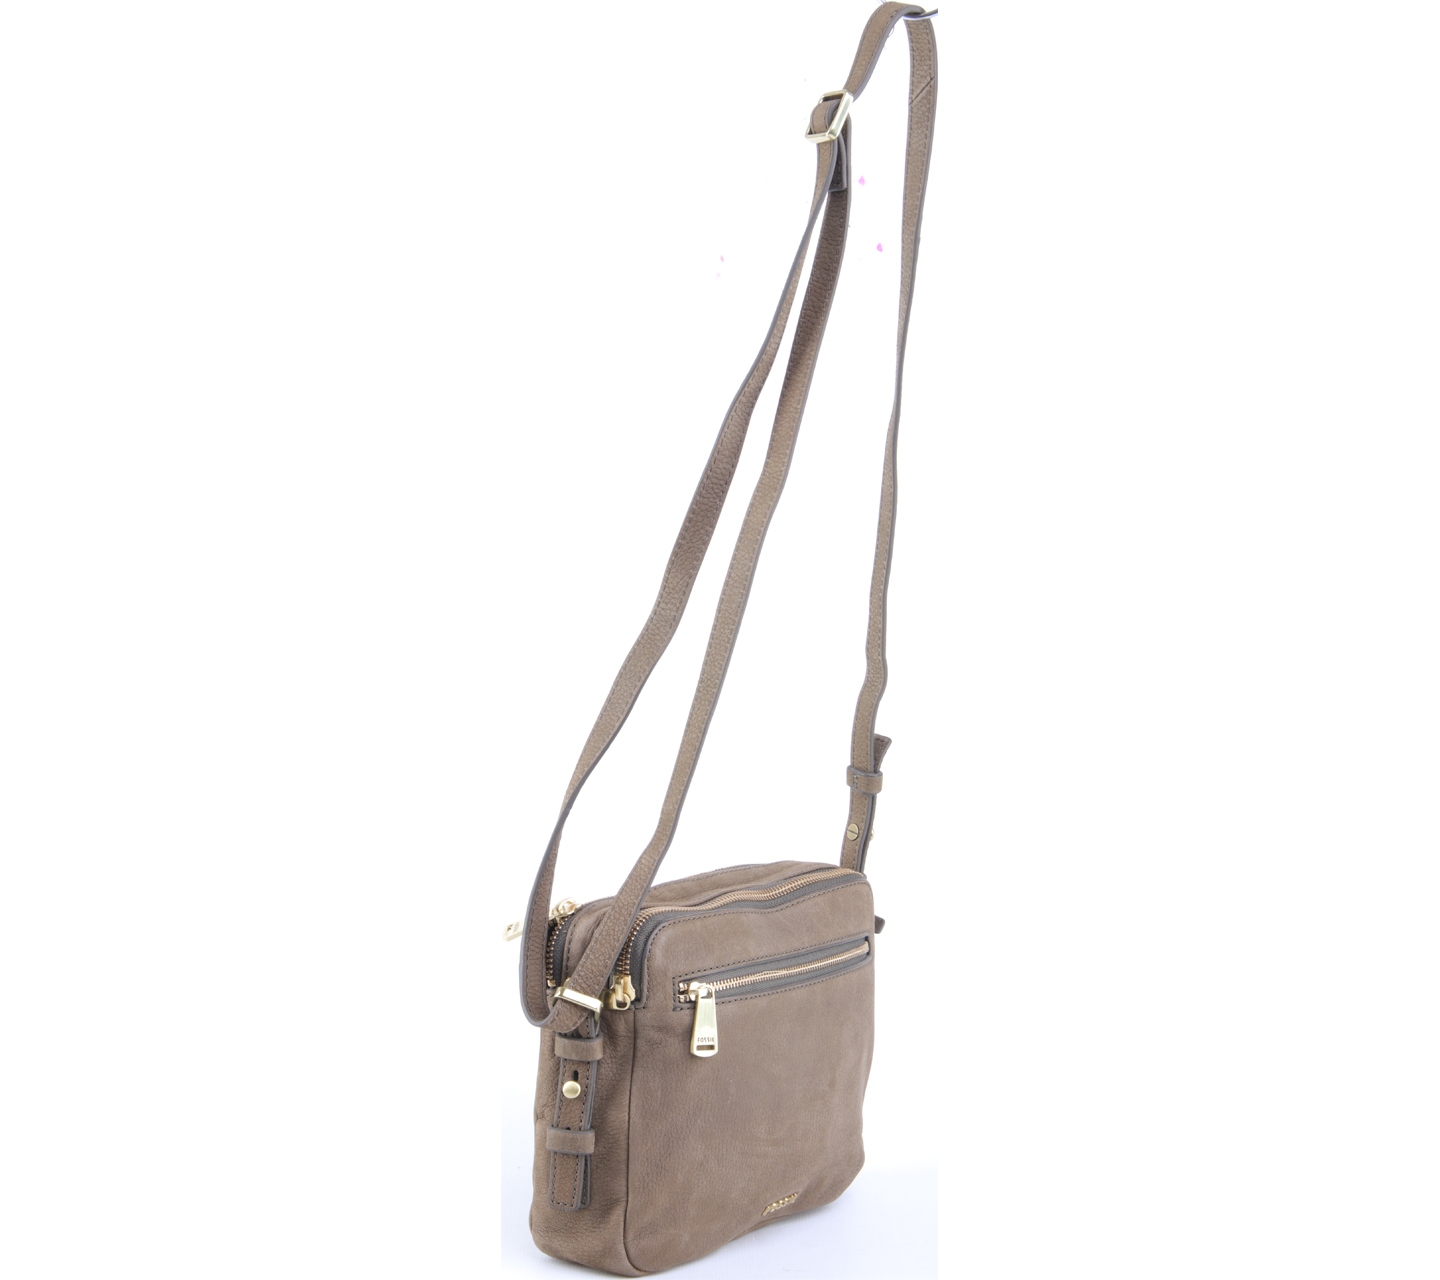 Fossil Army Soft pebbled leather Sling Bag